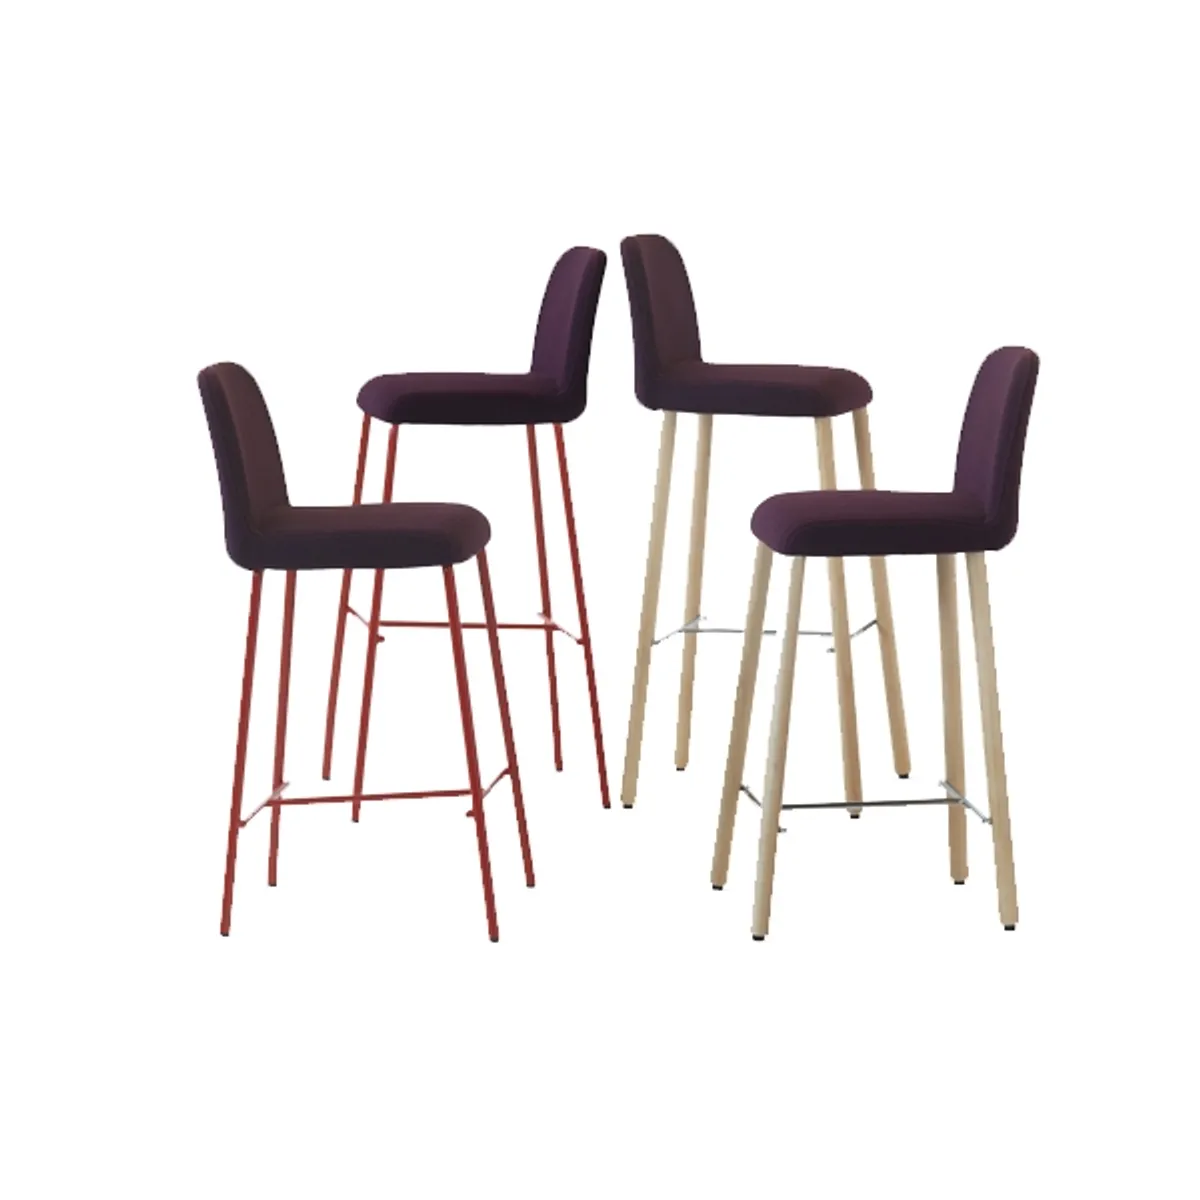 Myrabarstools Inside Out Contracts